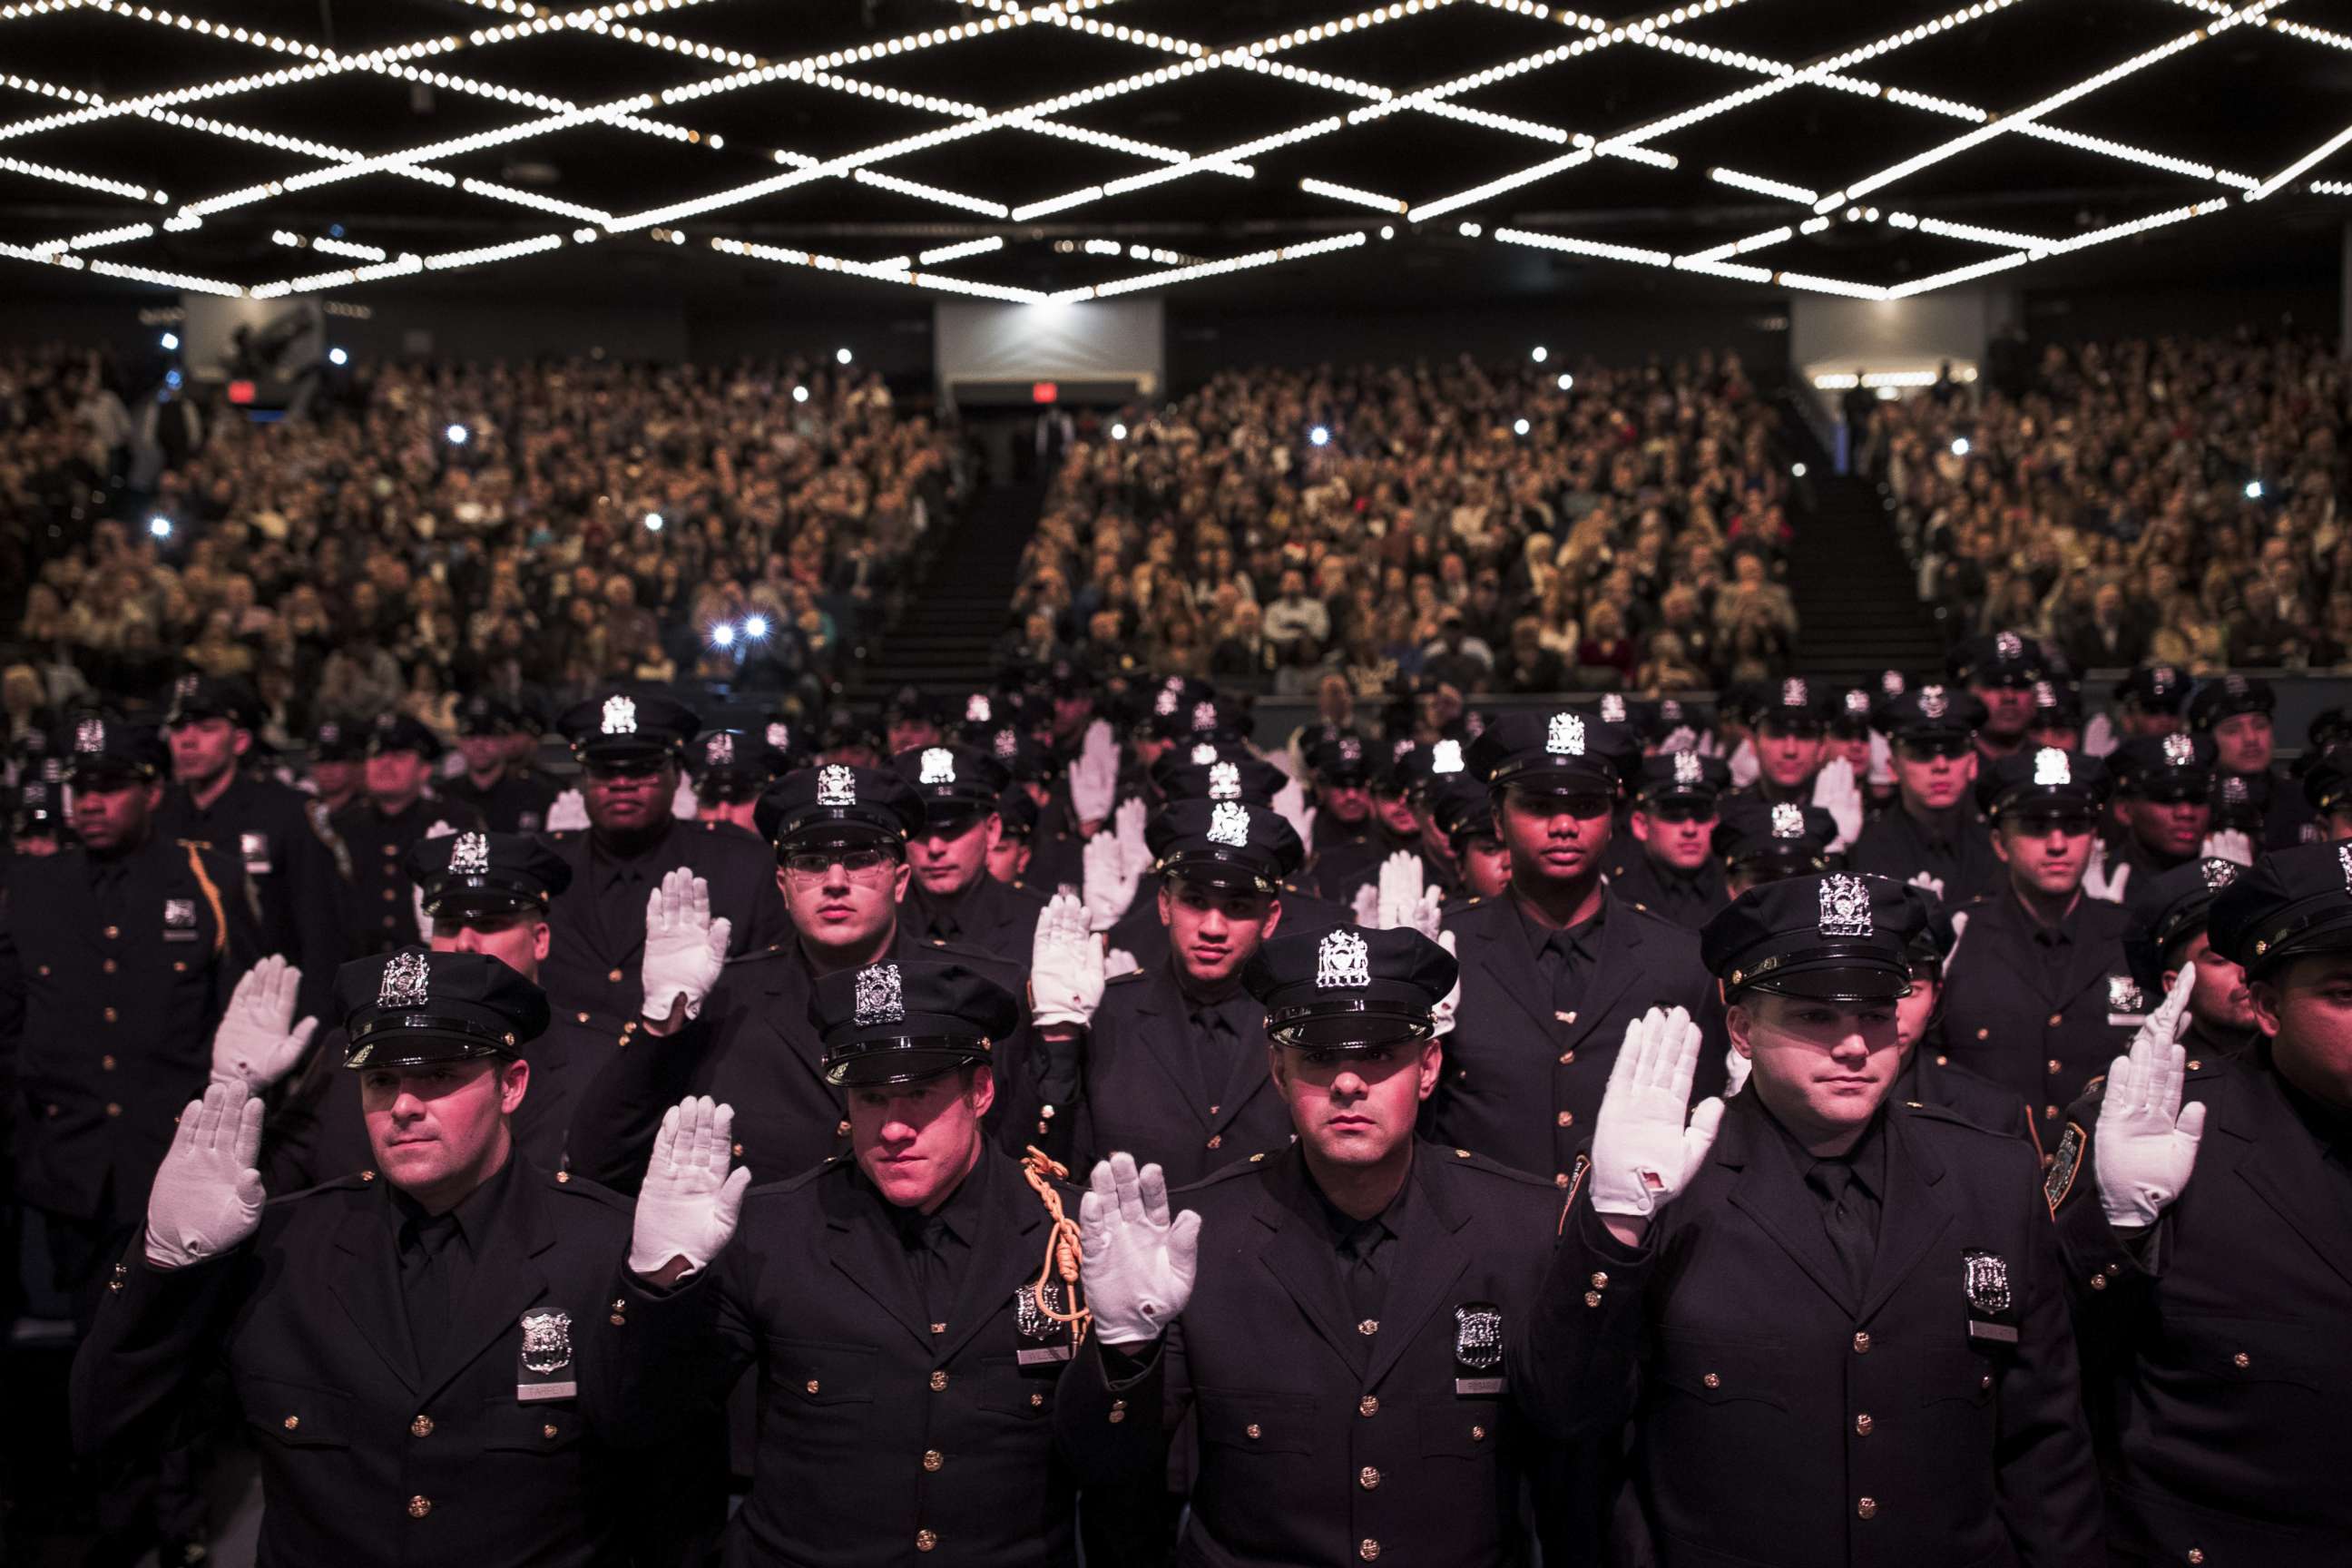 PHOTO: The newest members of the New York City Police Department are sworn-in during their police academy graduation ceremony at the Theater at Madison Square Garden, April 18, 2018 in New York.